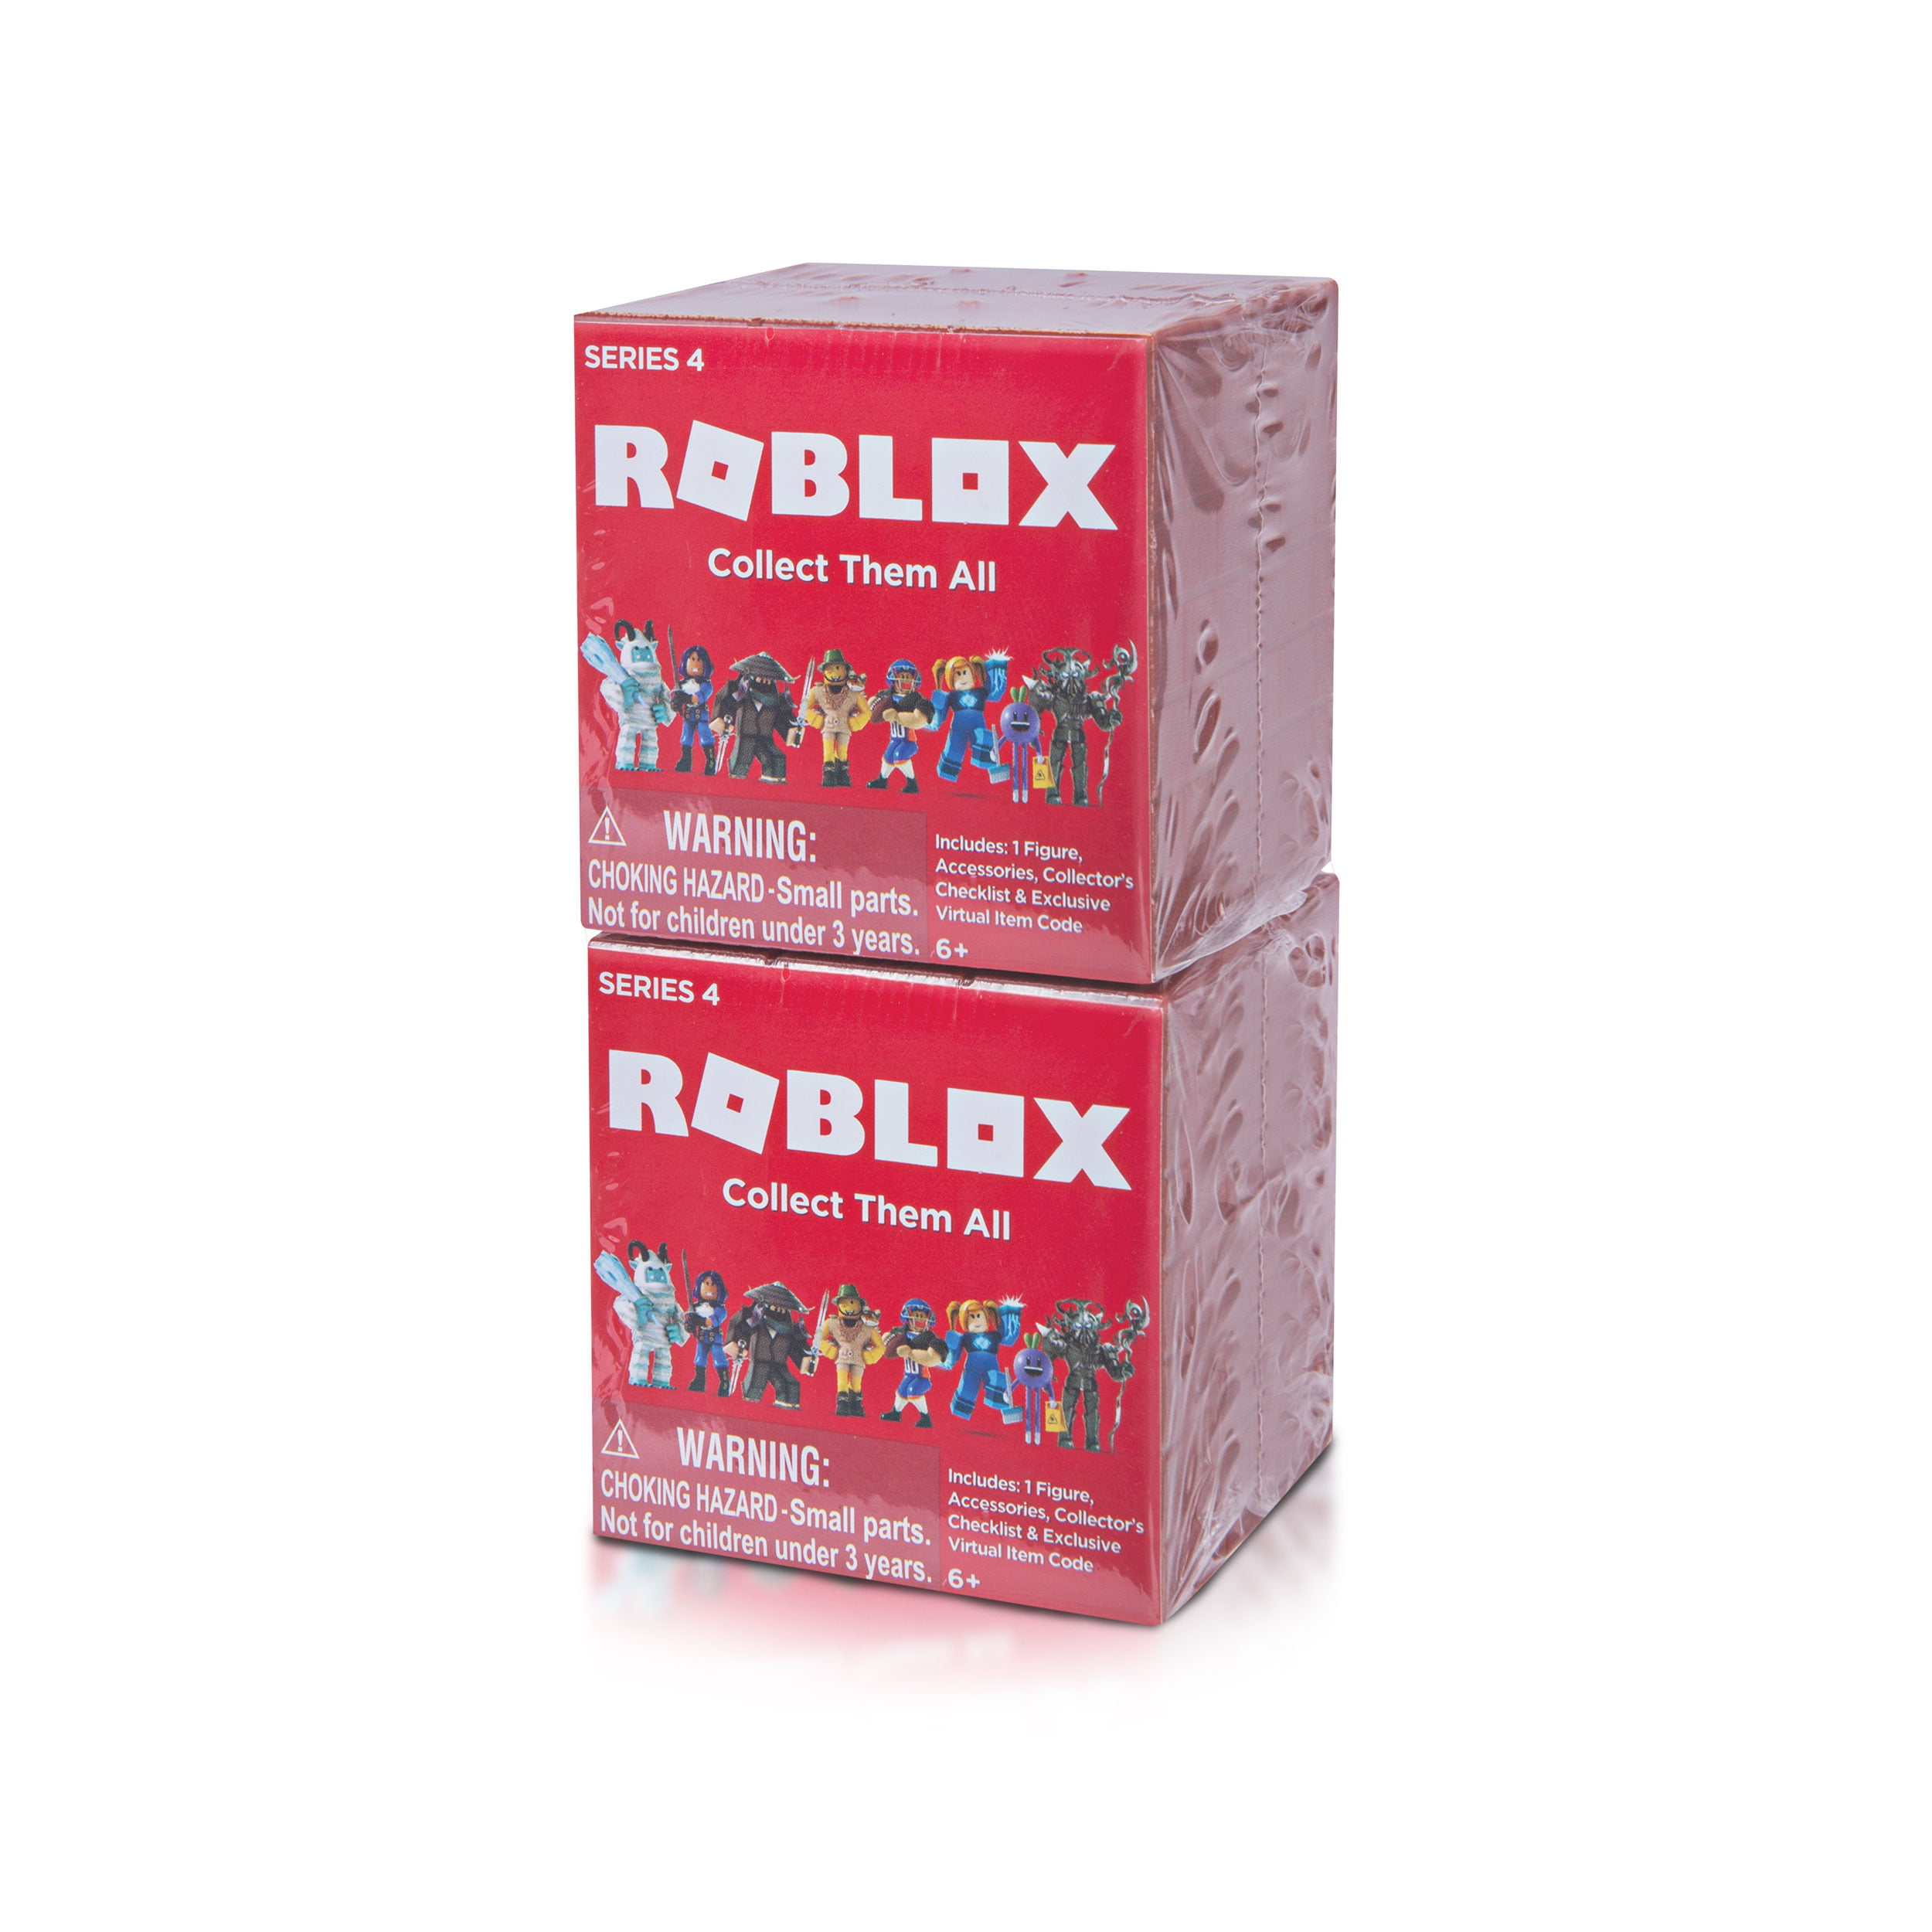 Do Roblox Mystery Boxes Come With Virutal Item Code